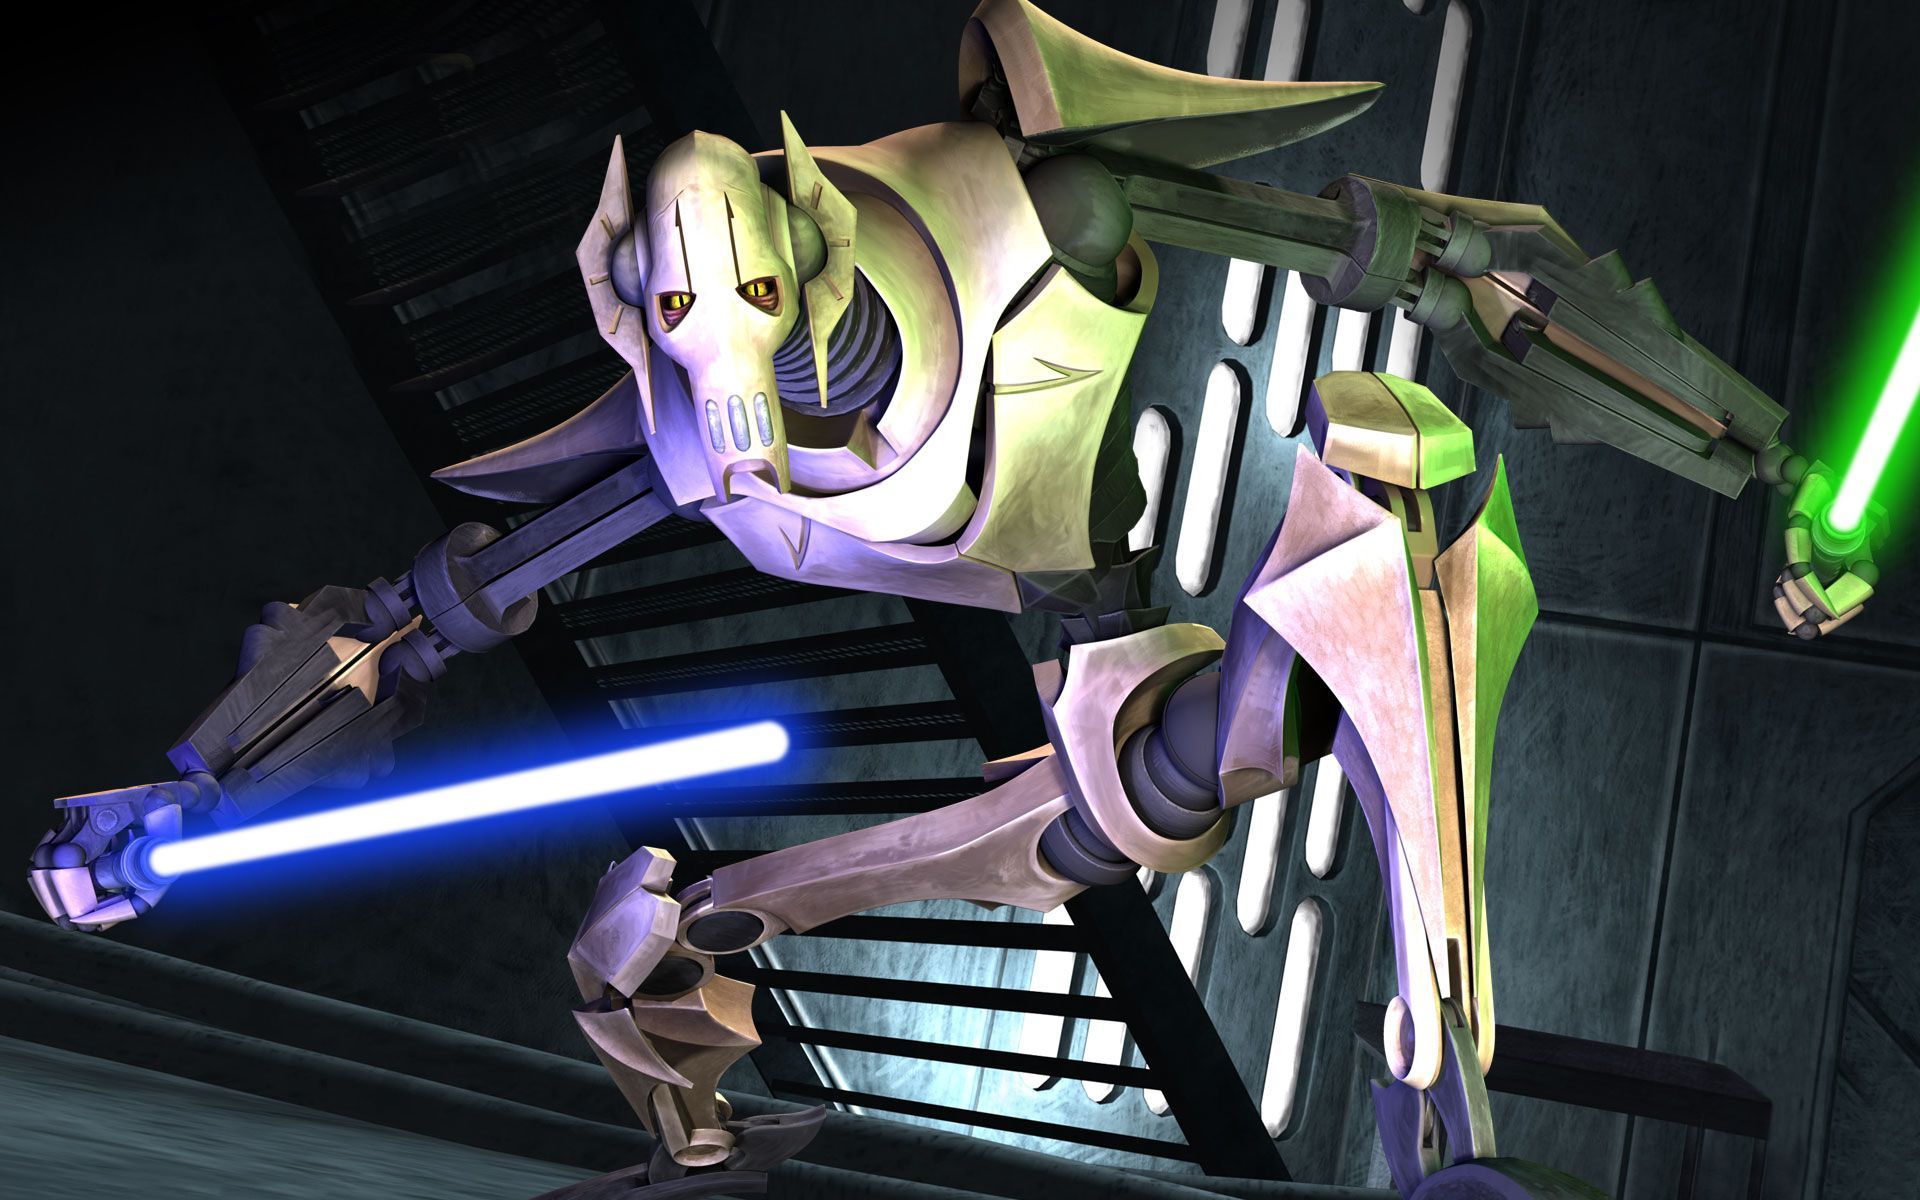 General Grievous (The Clone Wars). Star wars clone wars, Star wars wallpaper, Clone wars